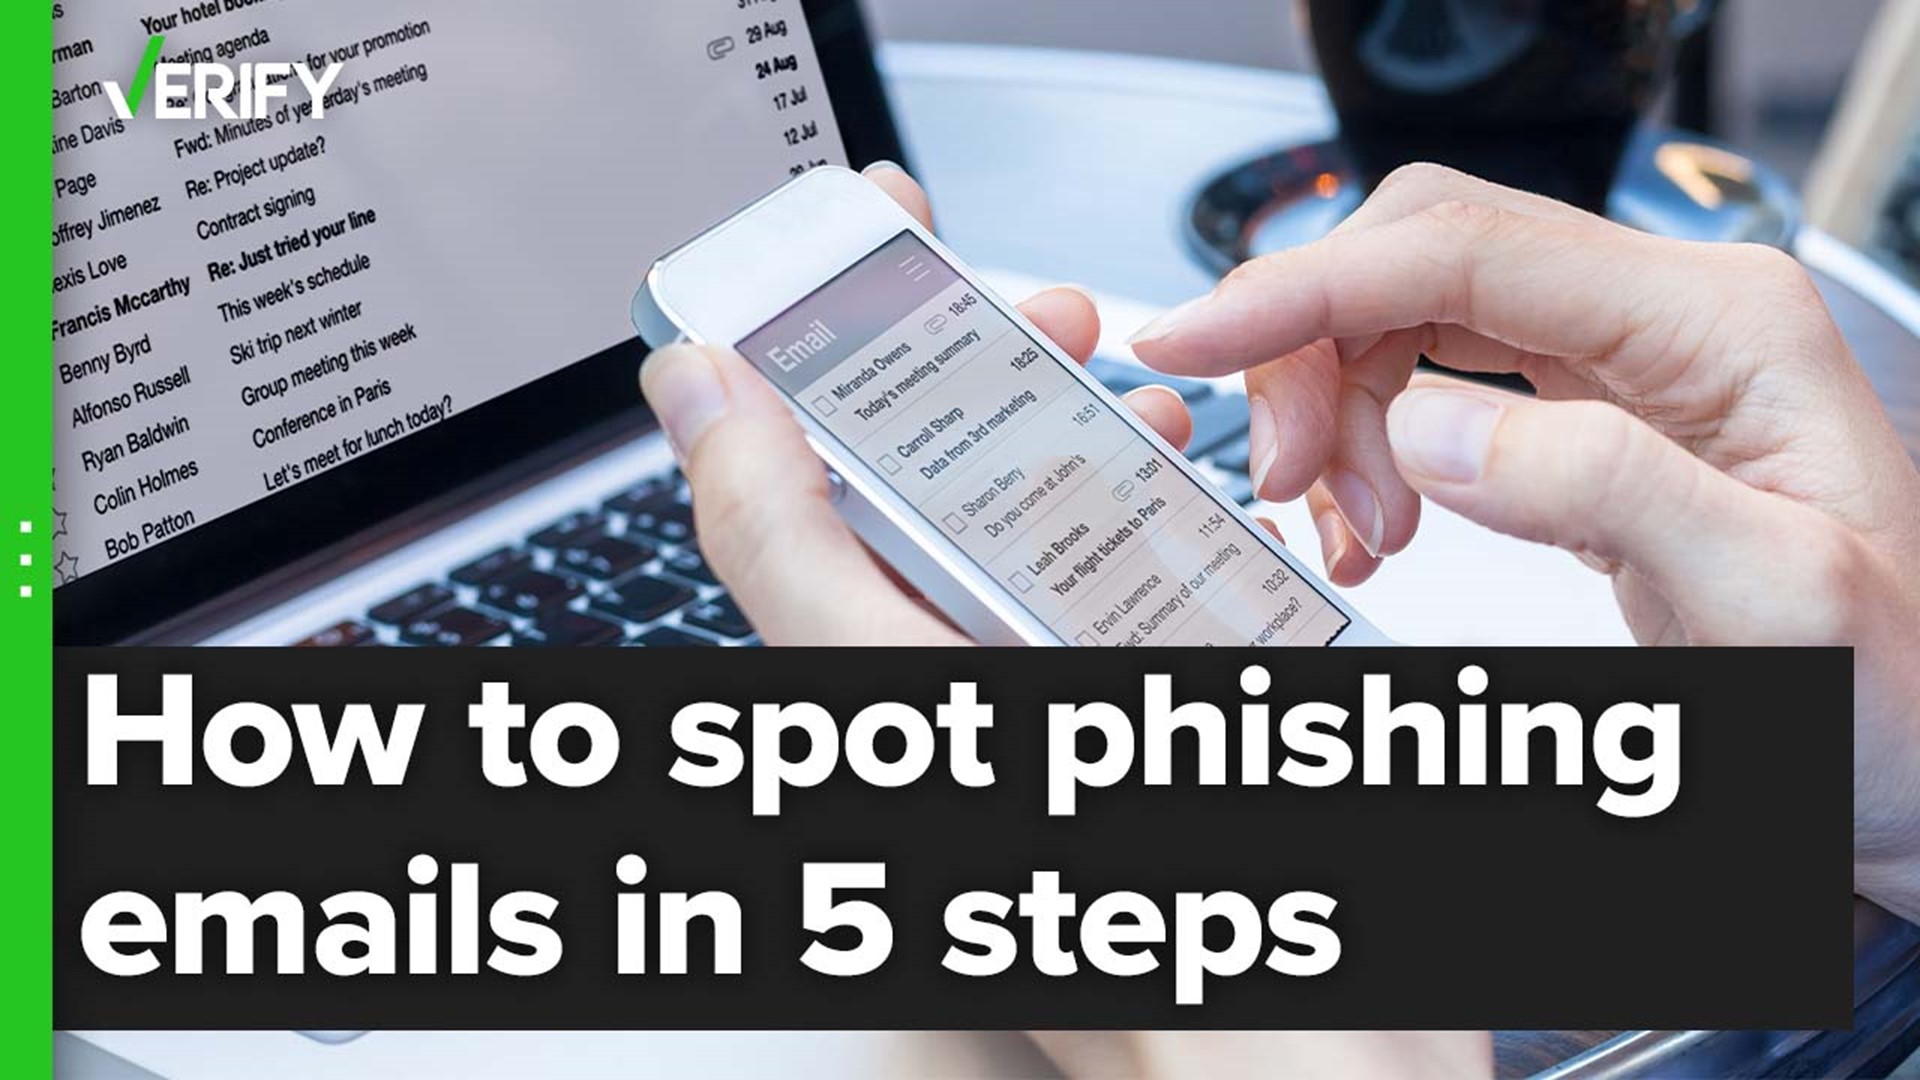 We compiled five key tips you can use to figure out if an email is a scam.